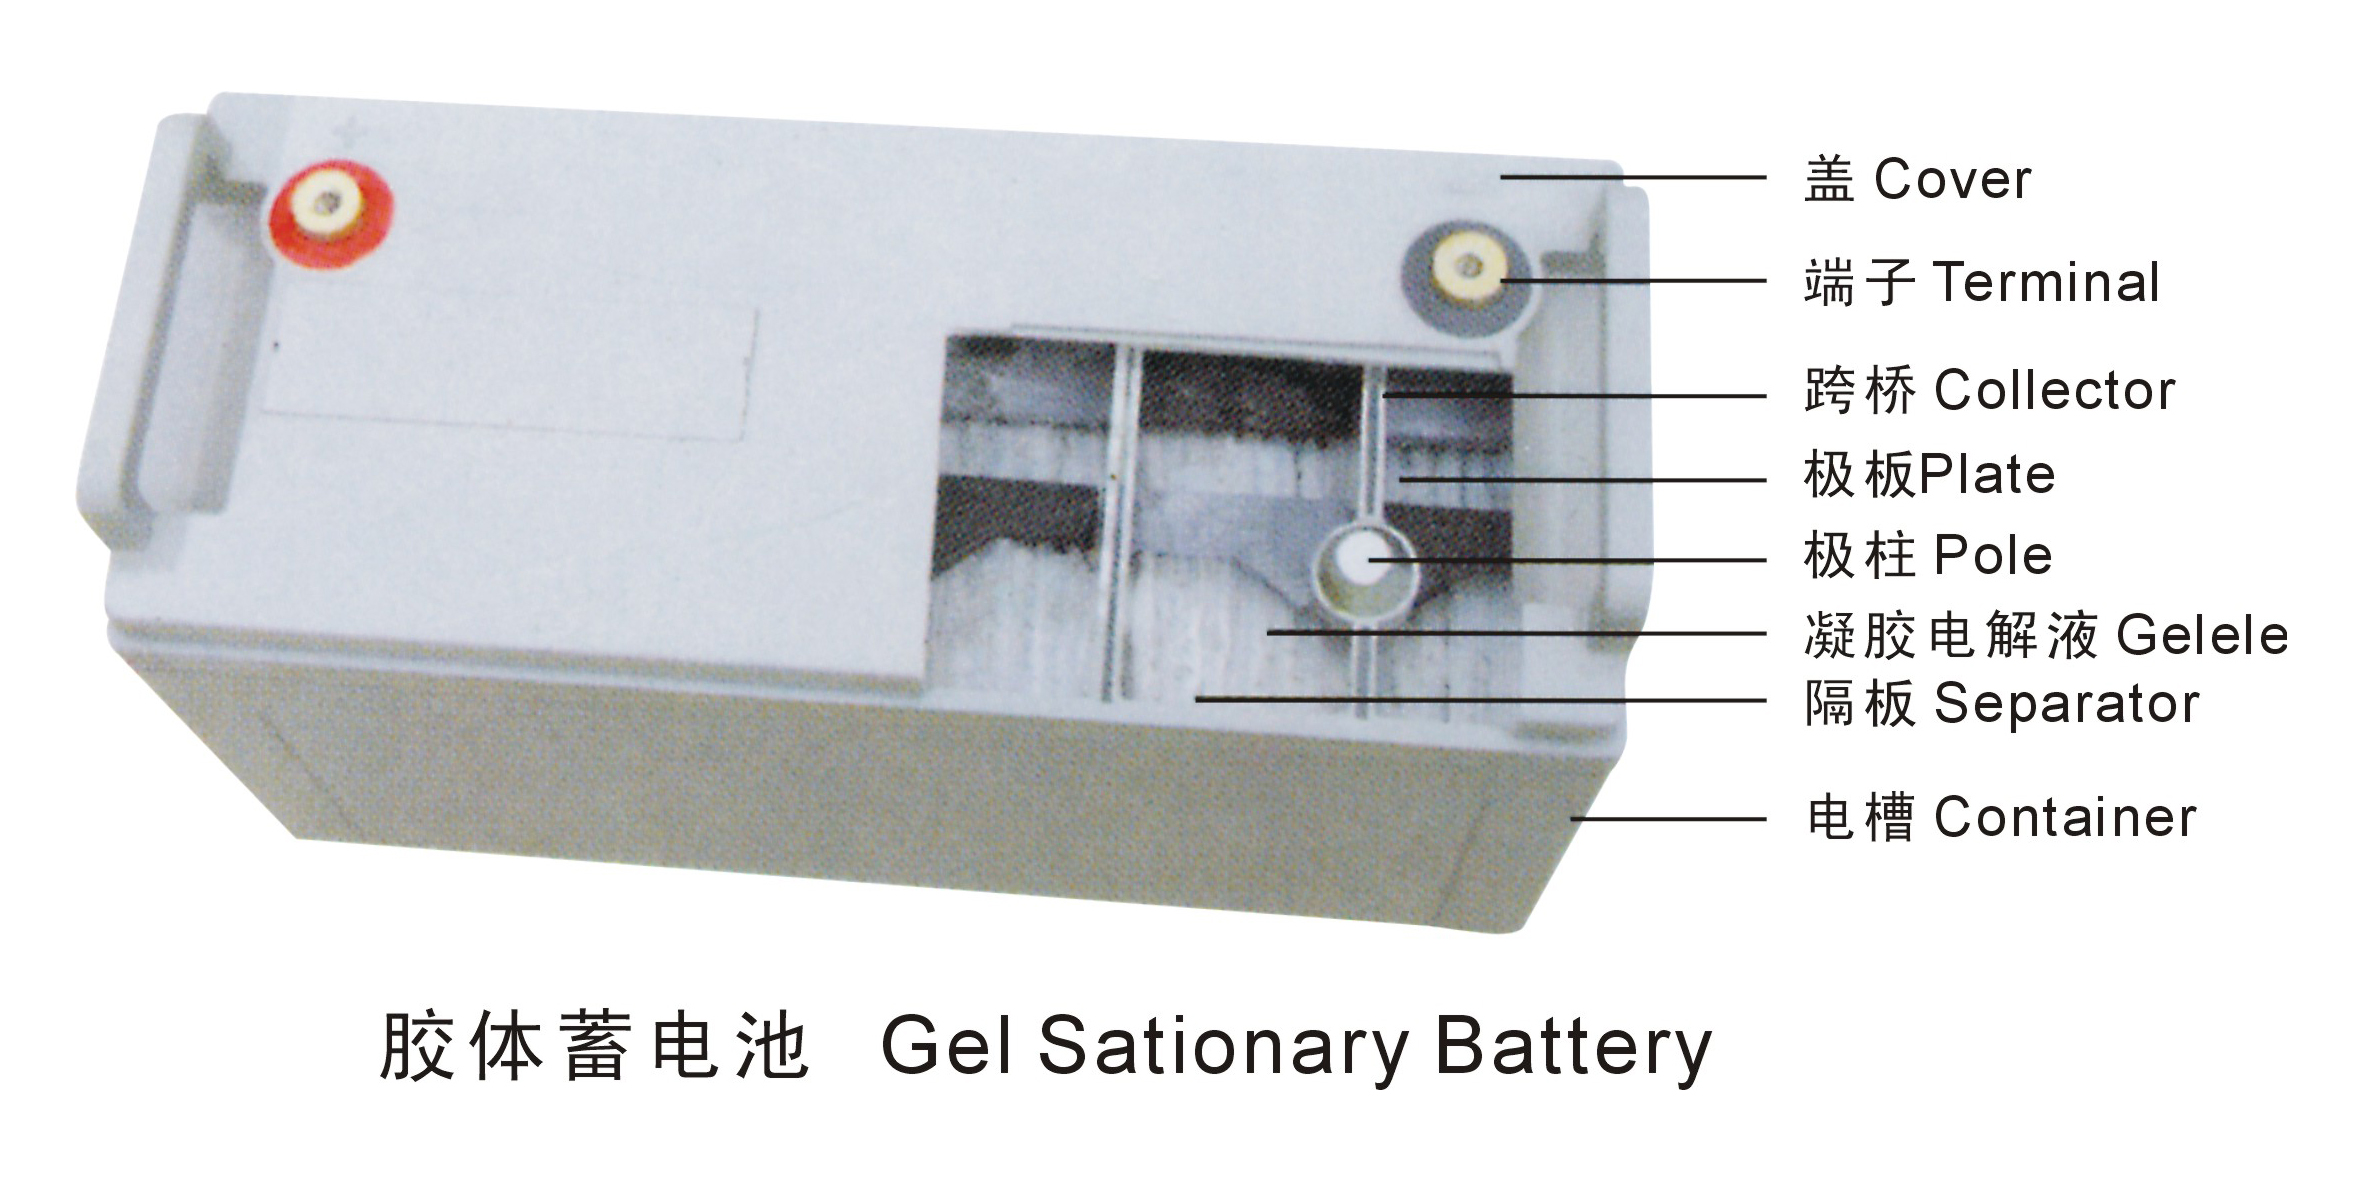 Internal structure diagram of the gel battery